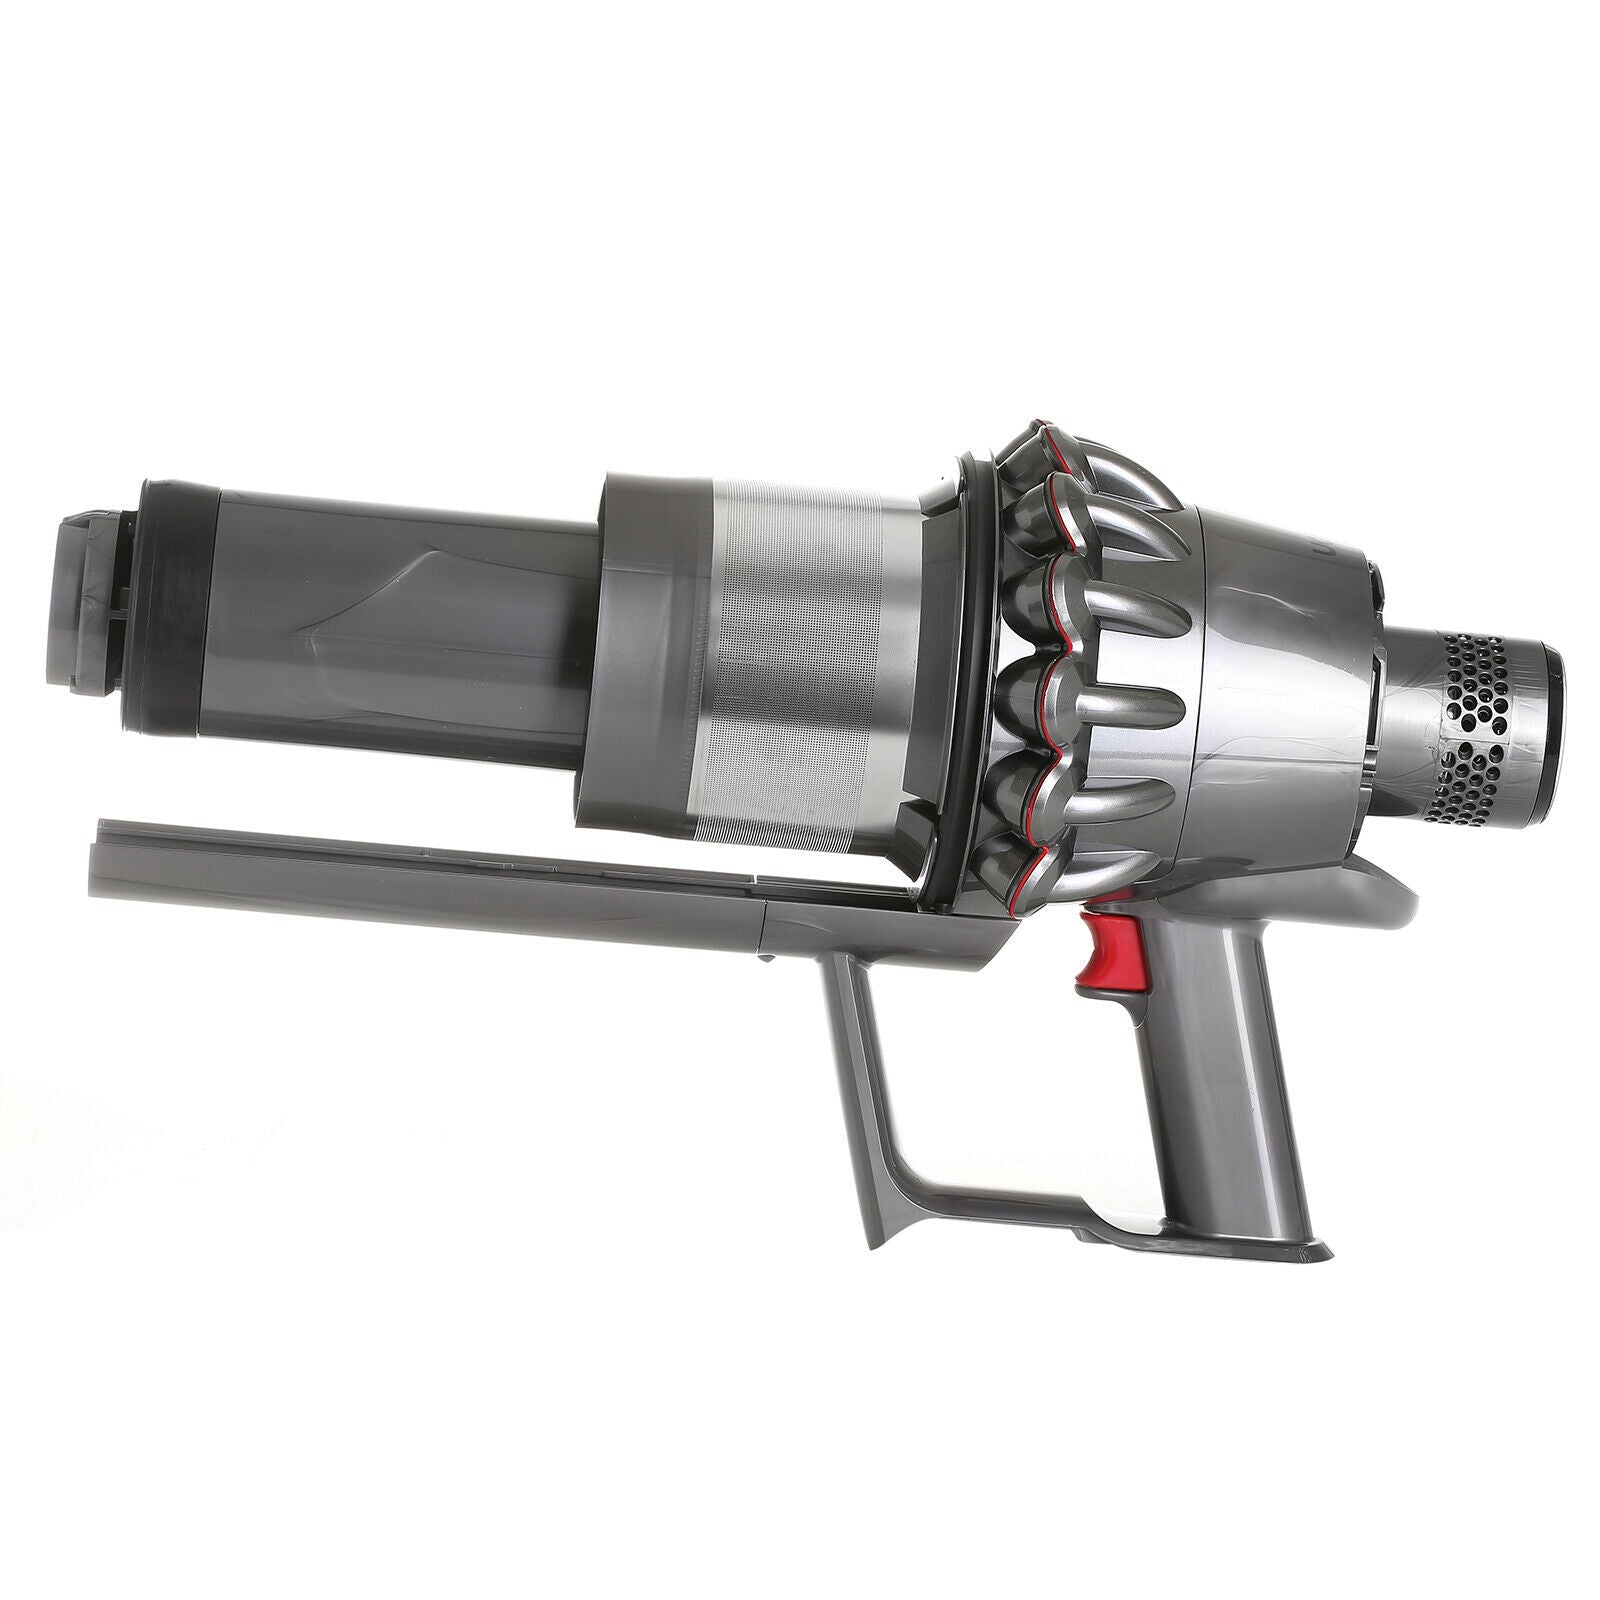 Dyson V10 cyclone and Body/Motor